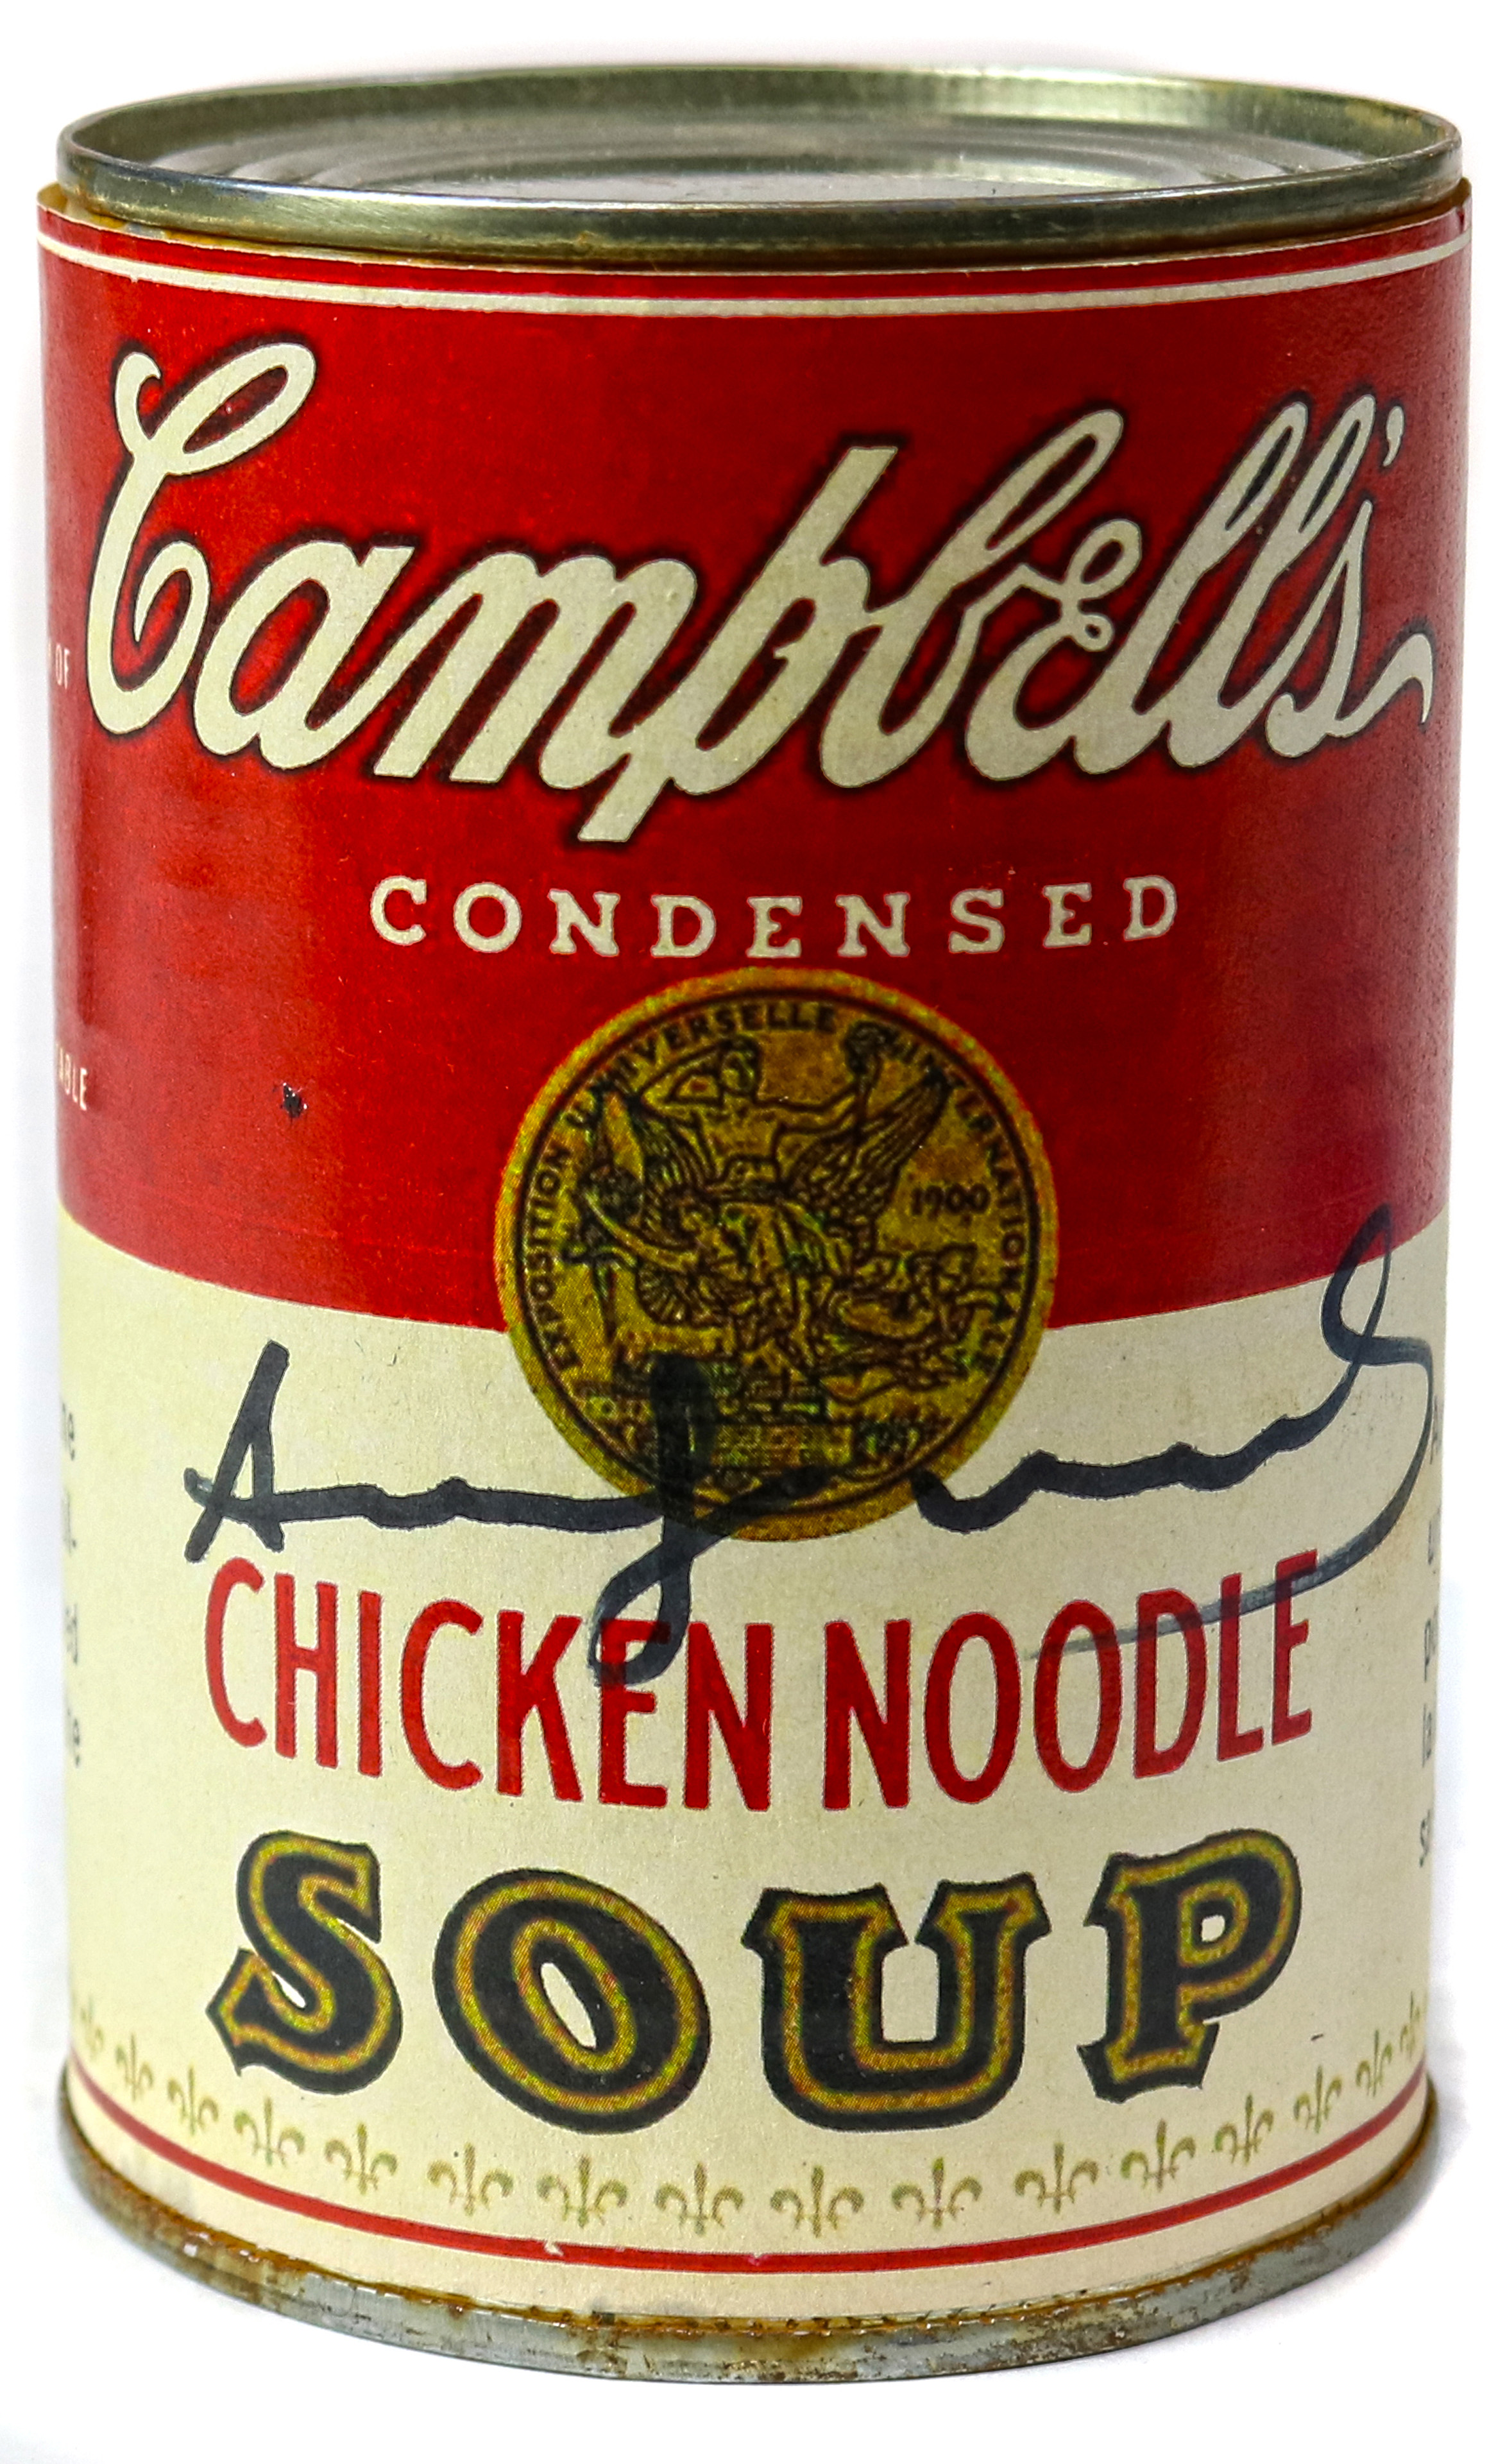 SOUP CAN ATTRIBUTED TO ANDY WARHOL 3a694c